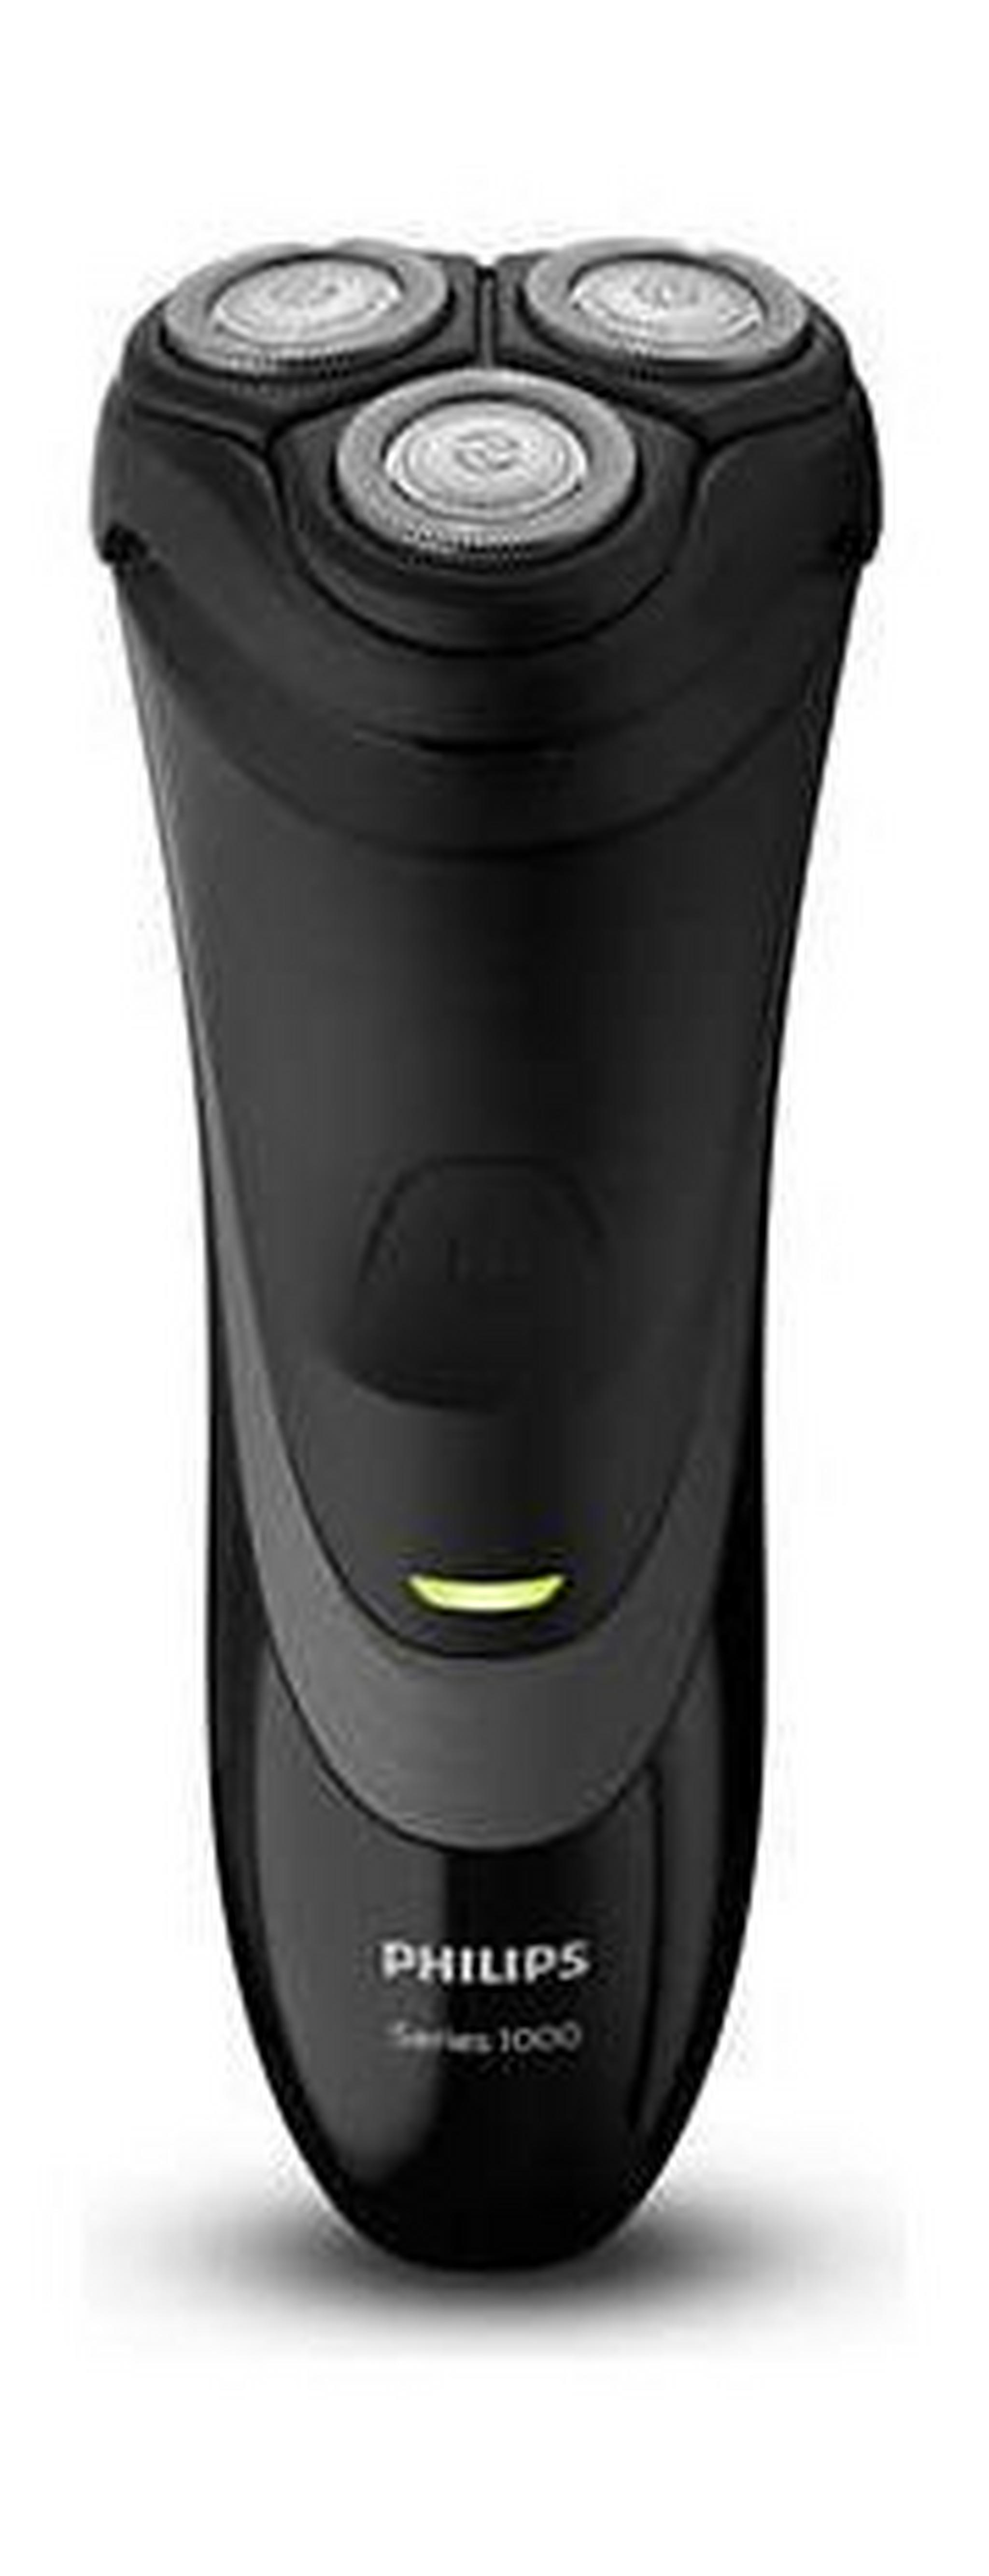 Philips Series 1000 Dry Electric Shaver (S1520/21) – Black